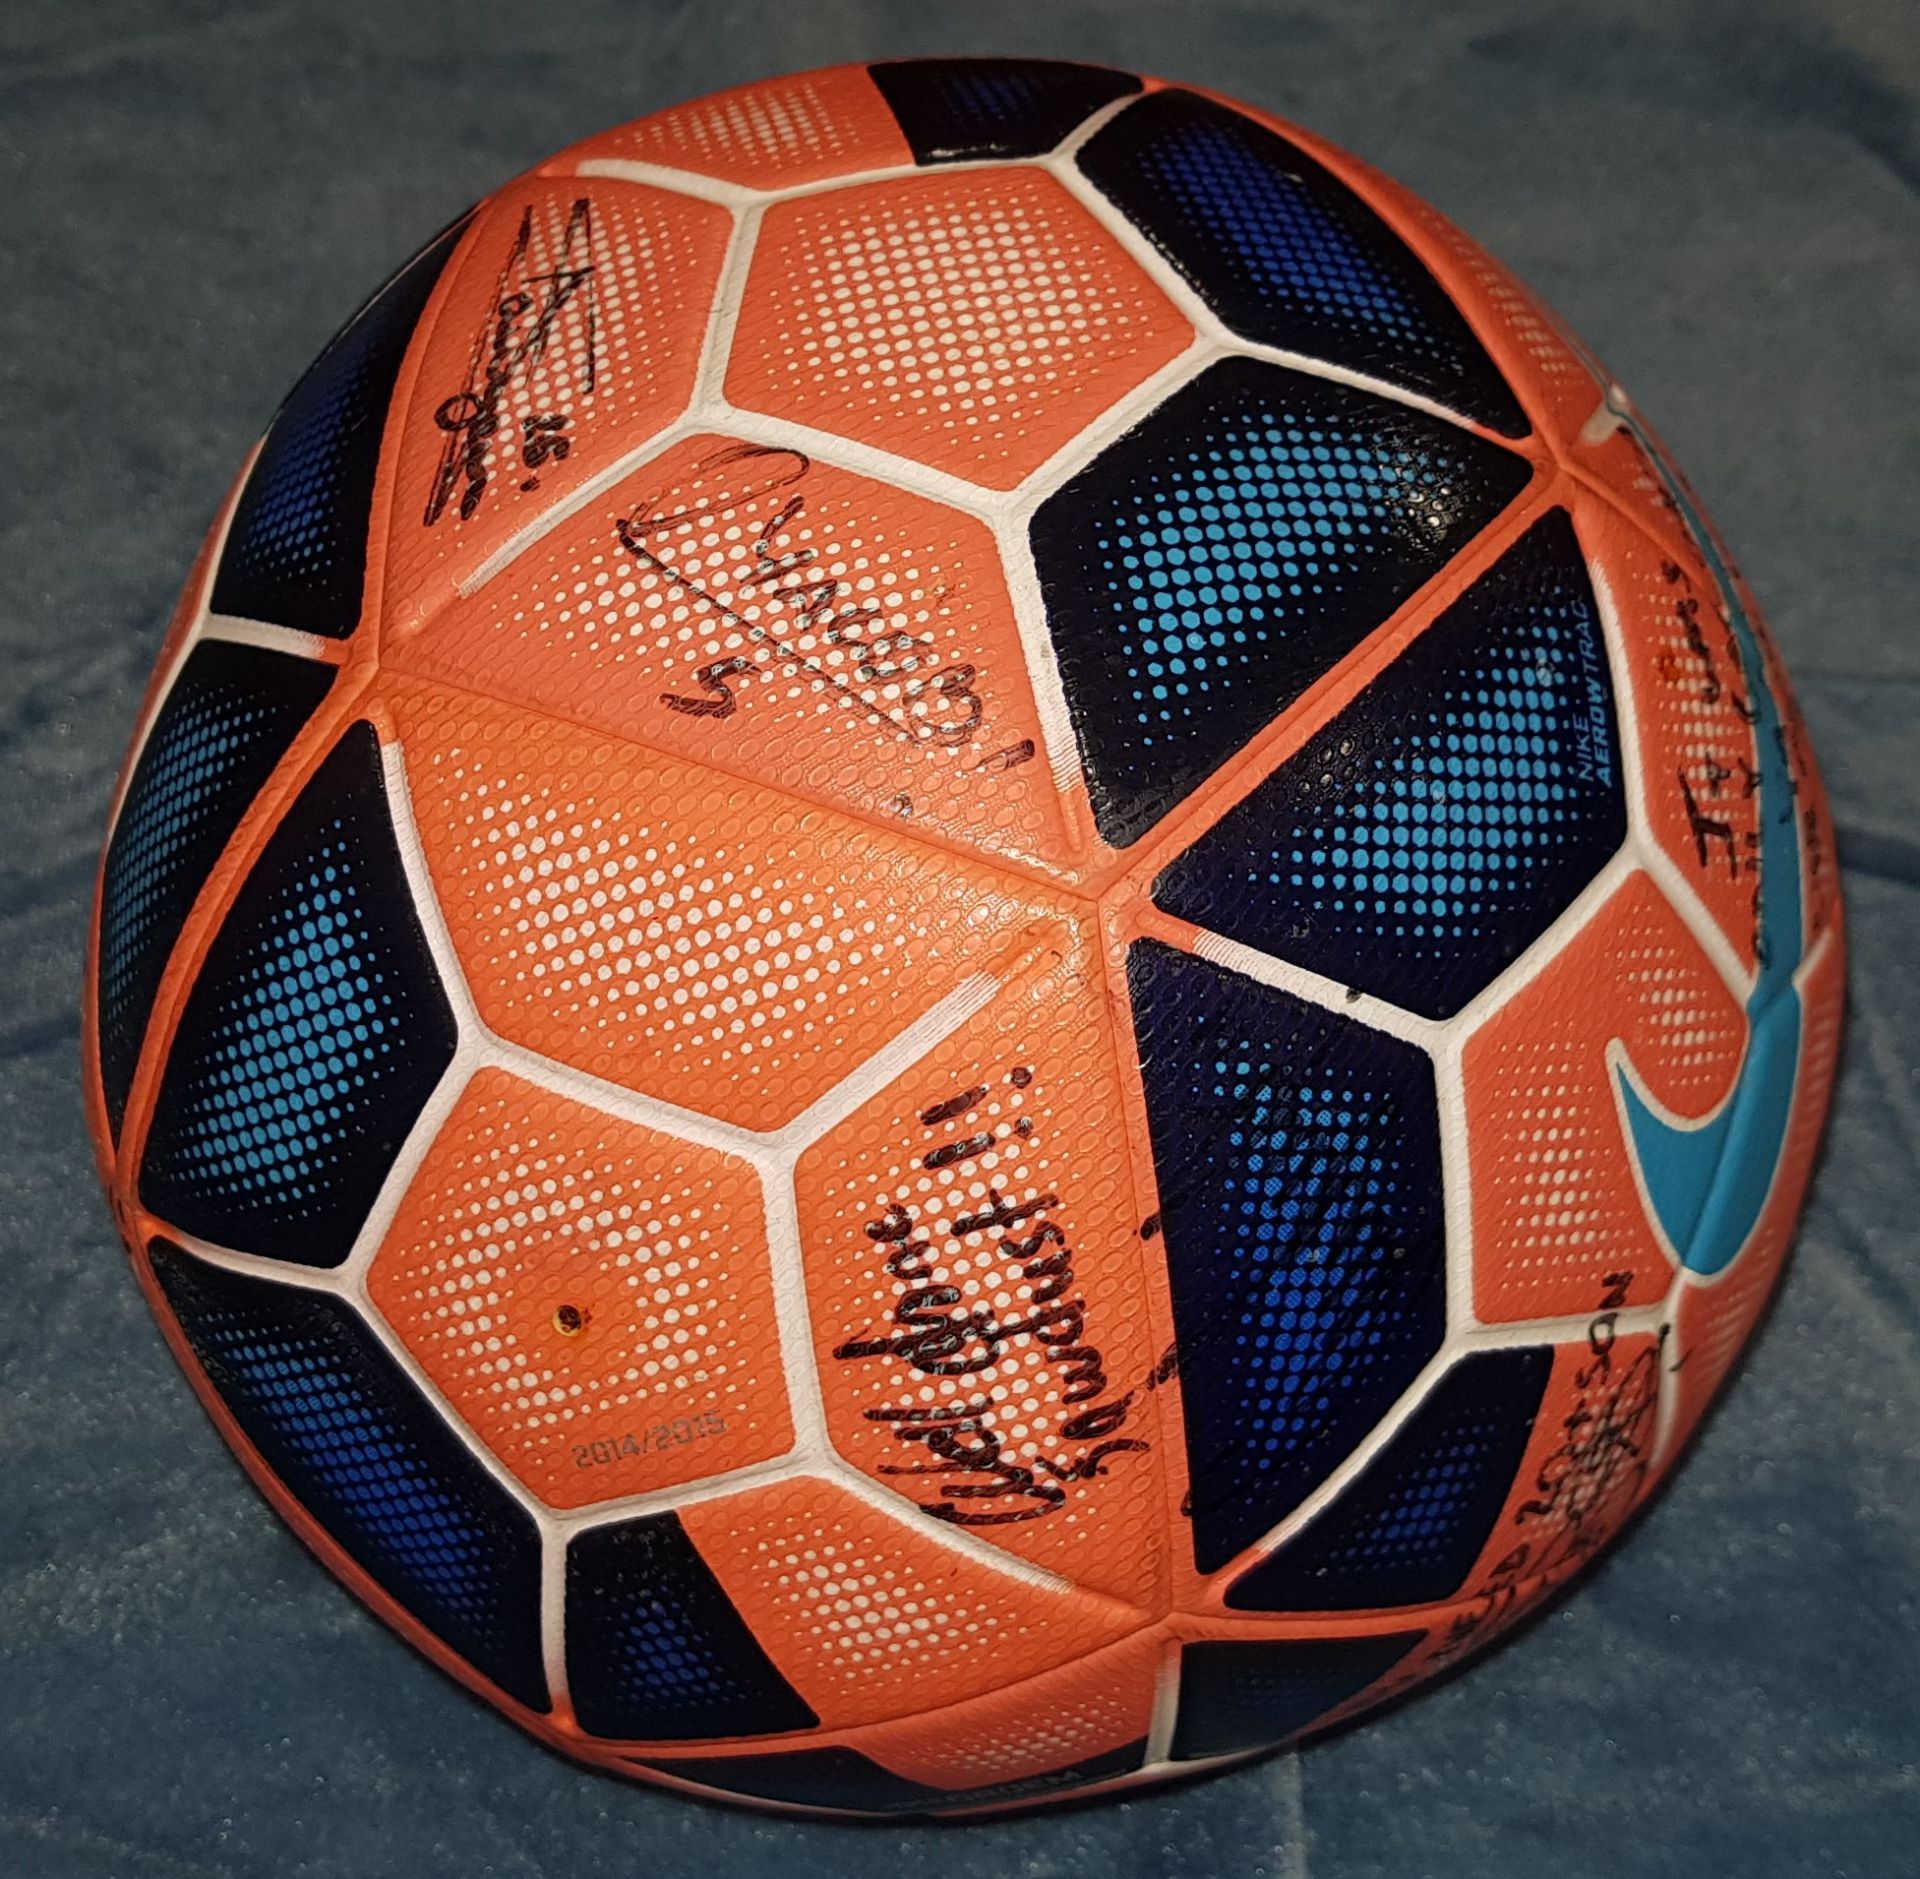 NIKE ORDEM THE FA CUP OFFICIAL MATCH BALL WITH NUMEROUS UNKNOWN SIGNATURES (SEE IMAGES) - Image 4 of 4